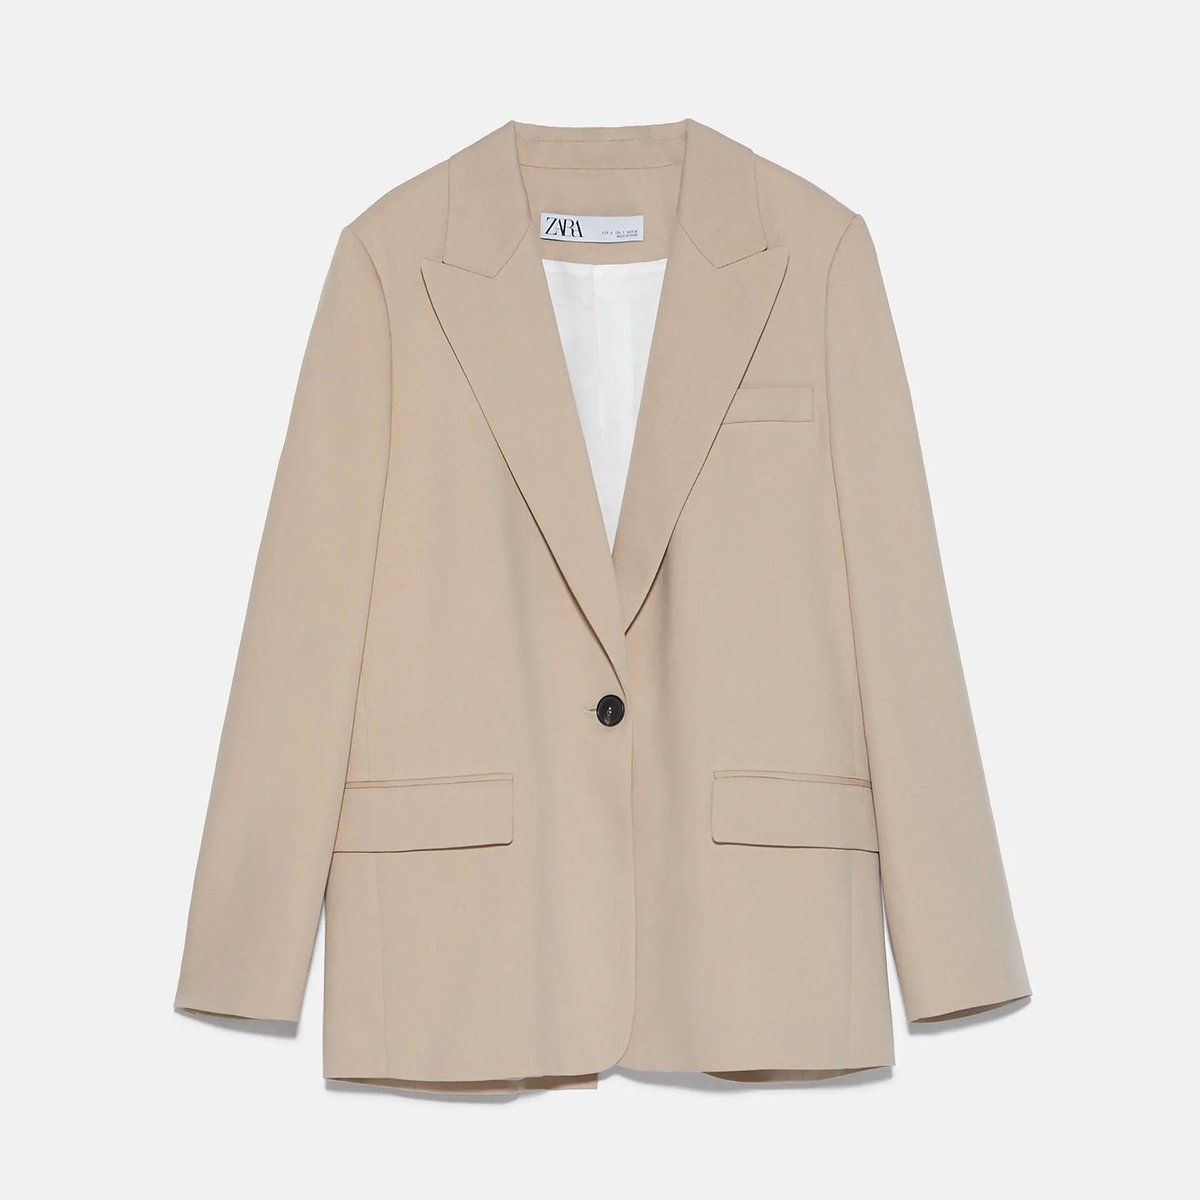 The $30 women's casual blazer you need for work 2021.